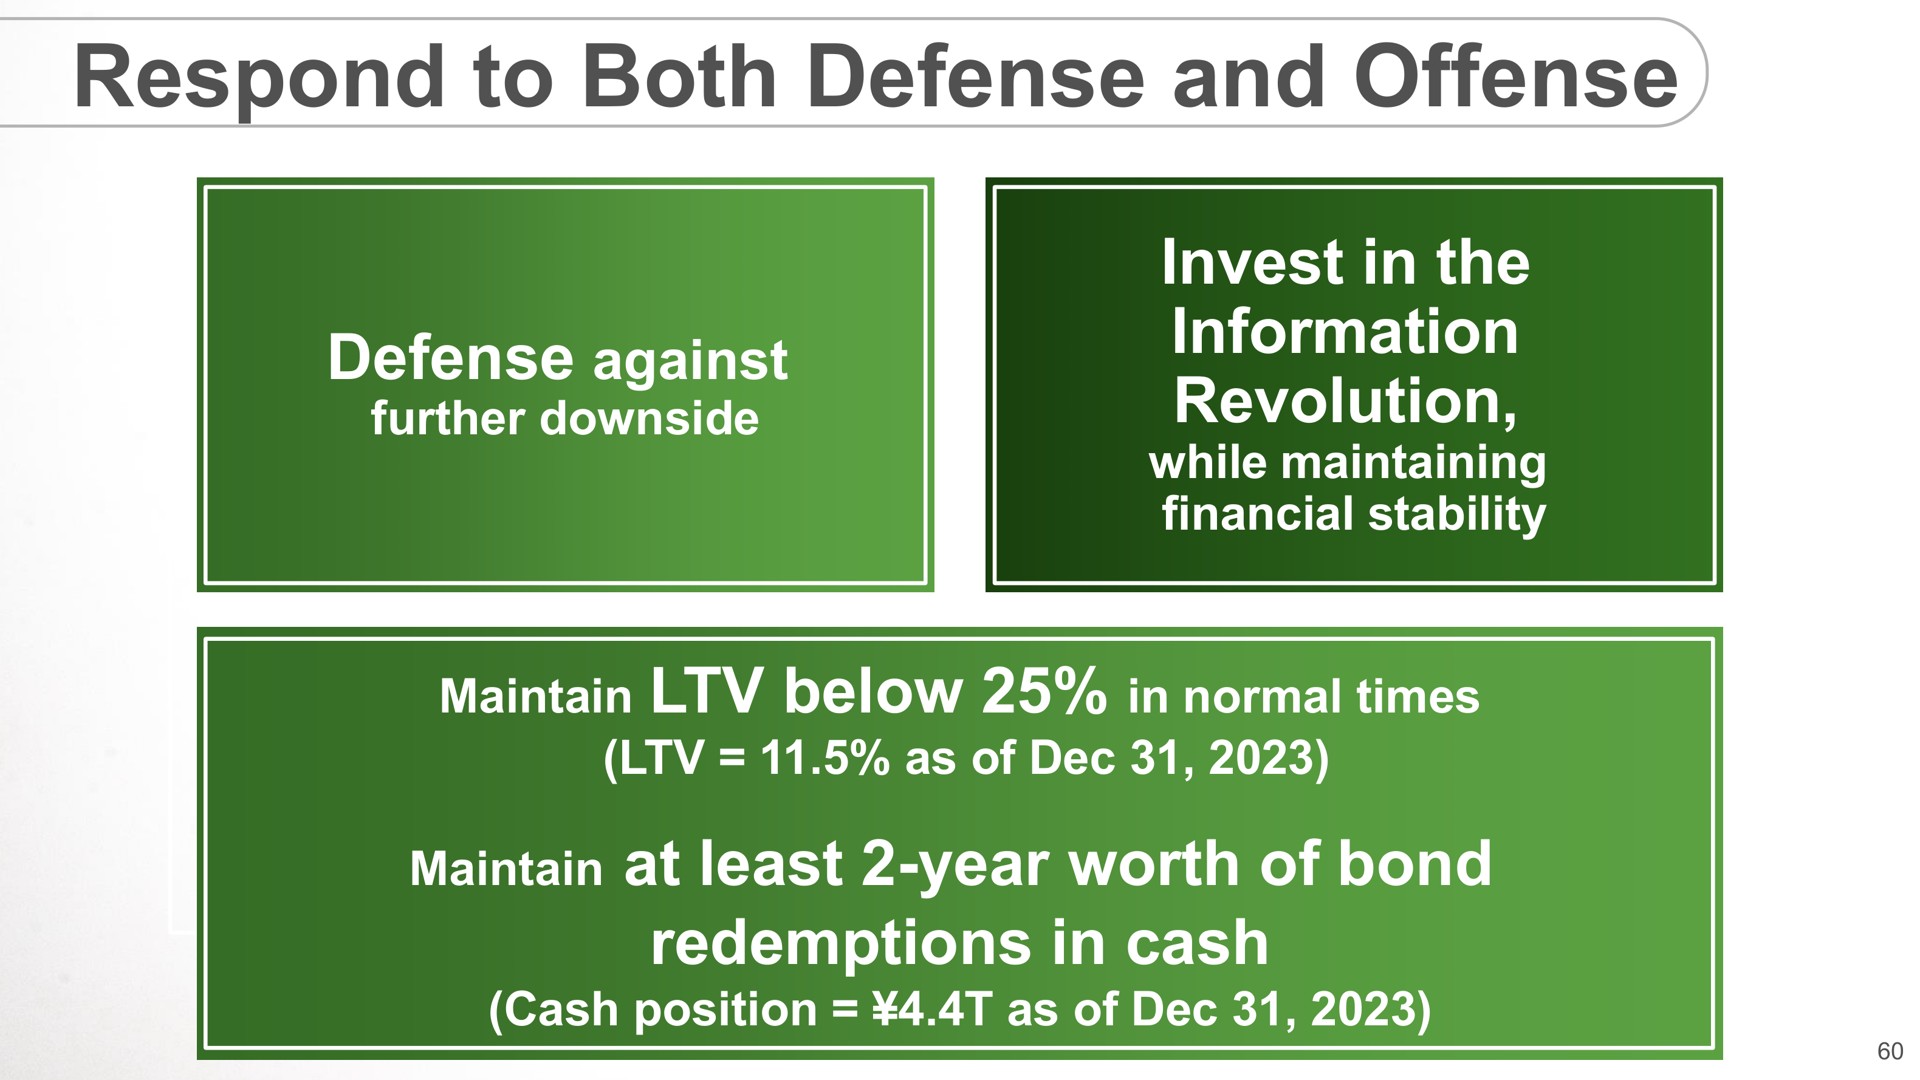 respond to both defense and offense invest in the information revolution maintain at least year worth of bond redemptions in cash | SoftBank